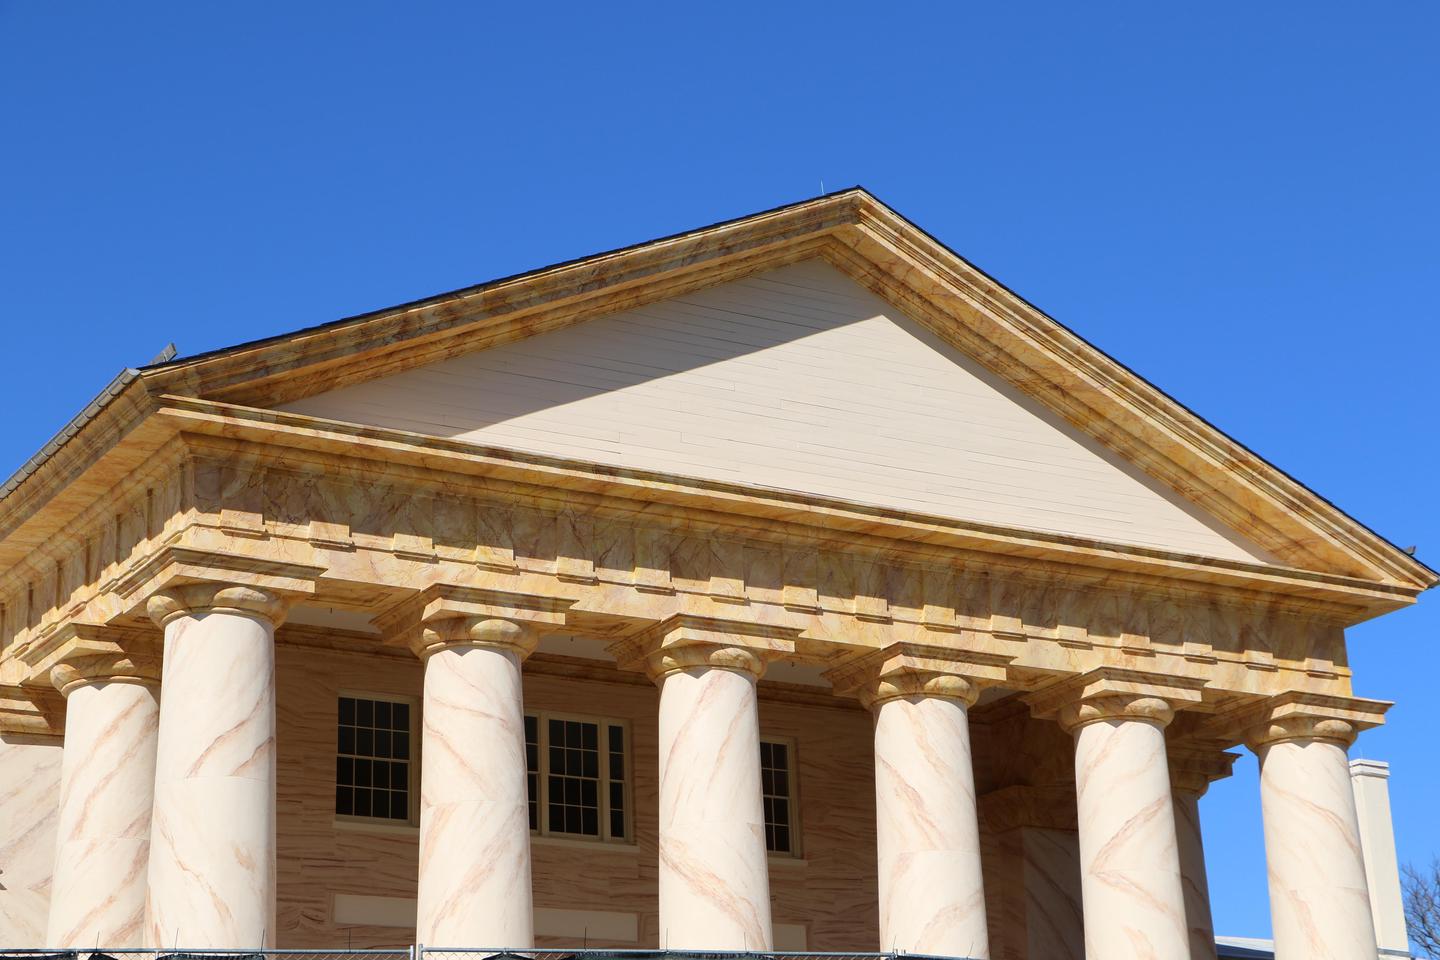 Roof and Portico of Arlington House, The Robert E. Lee MemorialArlington House, The Robert E. Lee Memorial